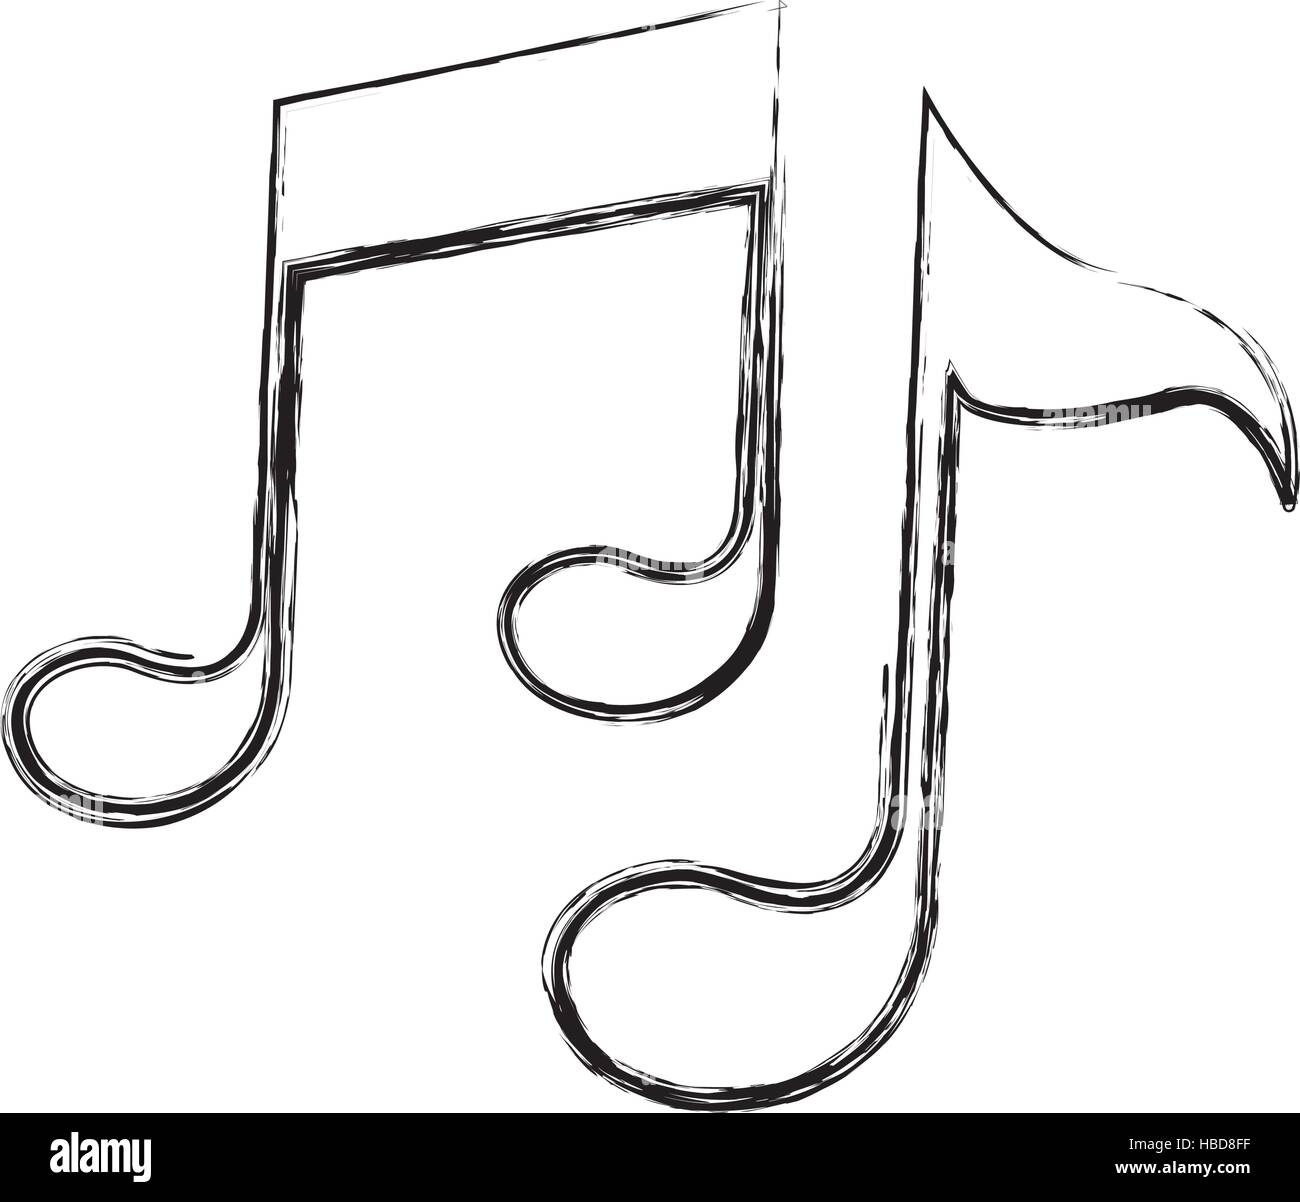 Music Note High Resolution Stock Photography and Images - Alamy